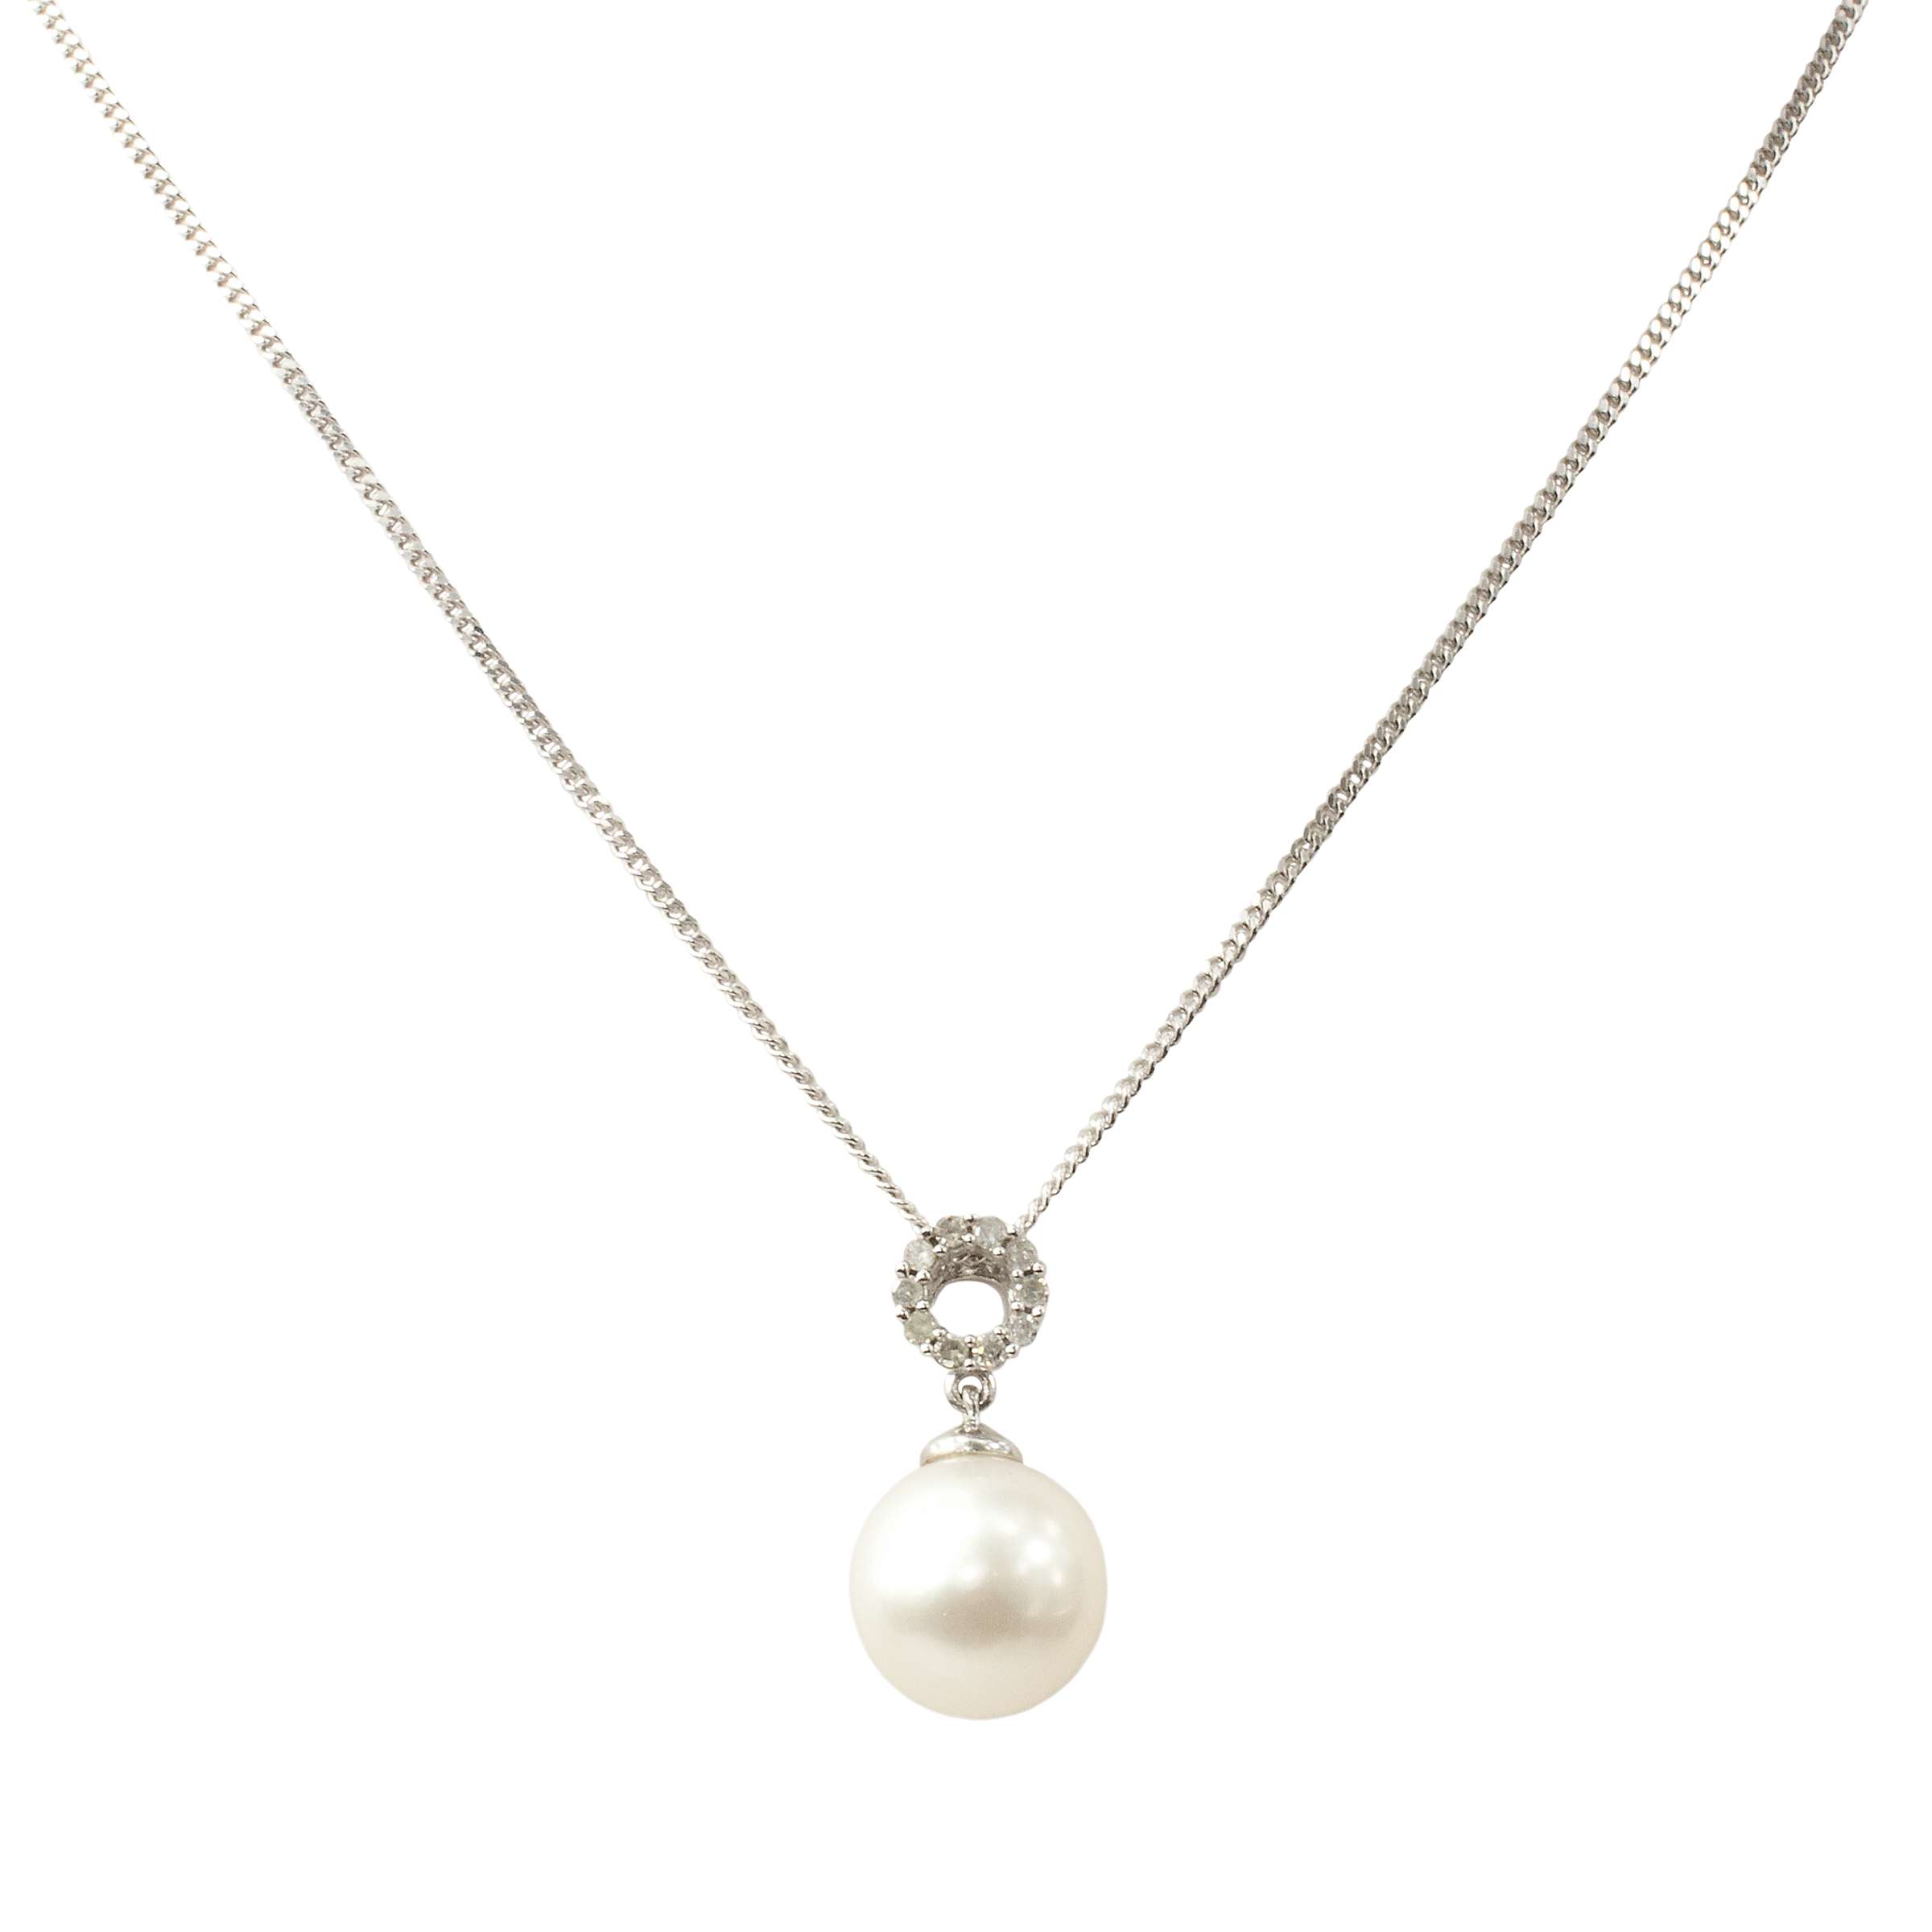 Buy A B Davis Diamond And Pearl Loop Pendant Necklace Online at johnlewis.com